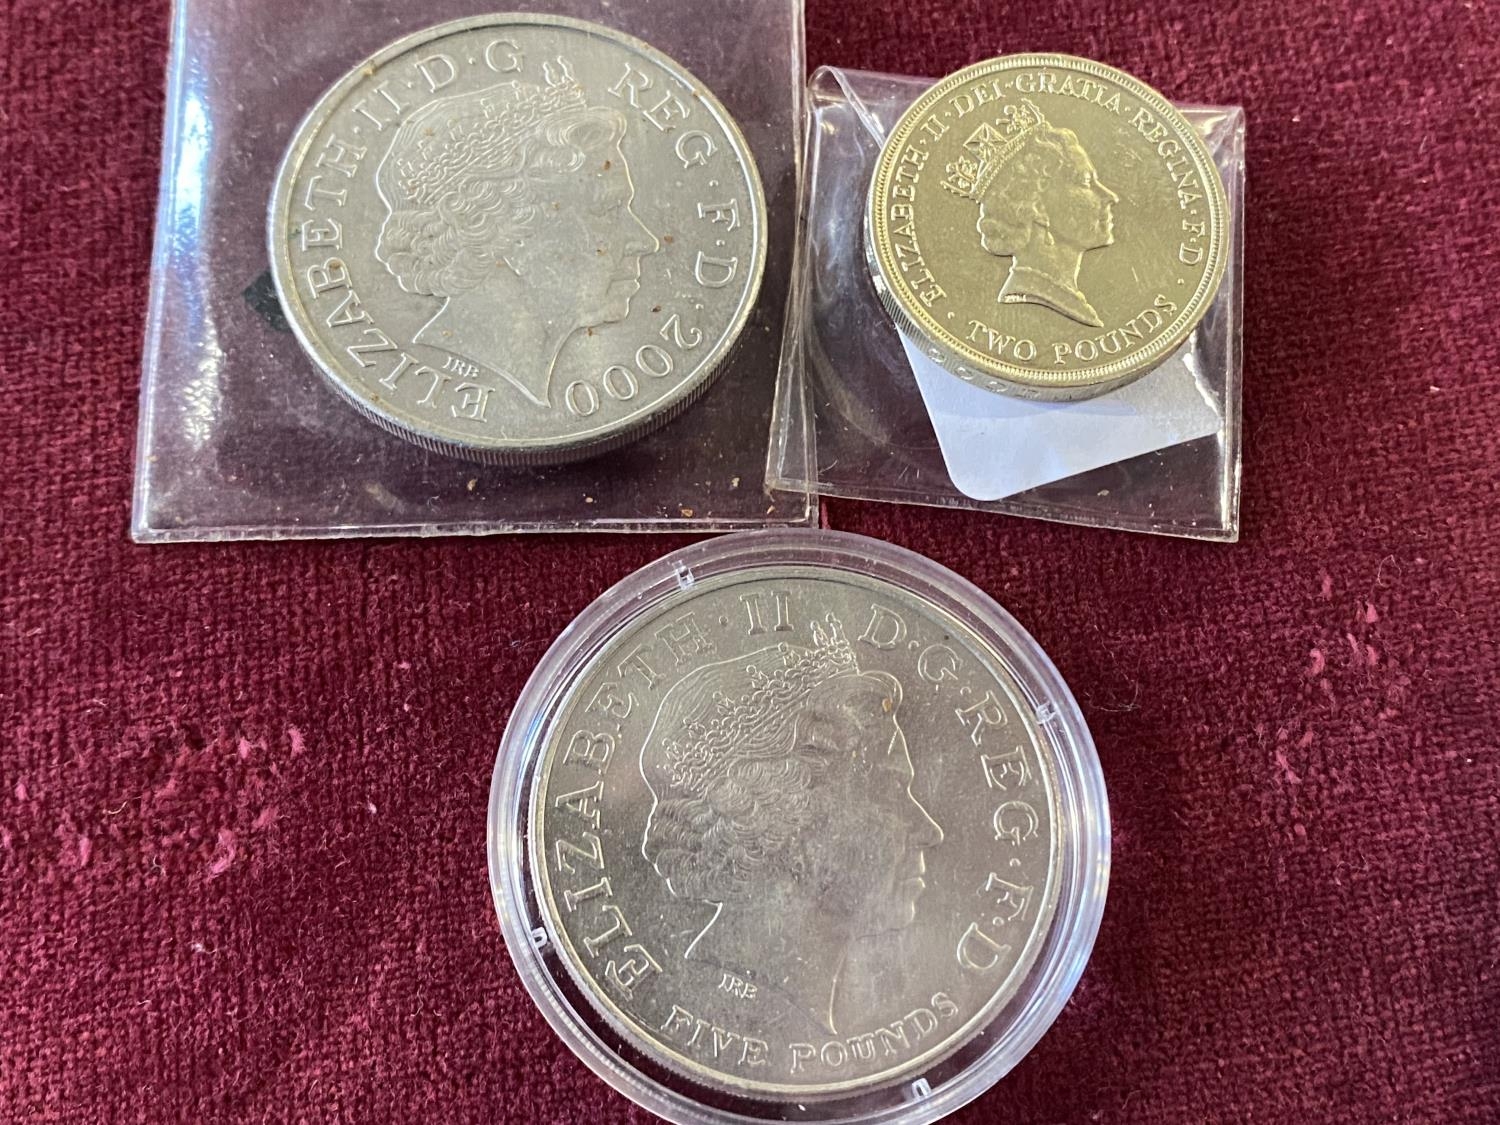 A collectable £5 and £2 coin and one other